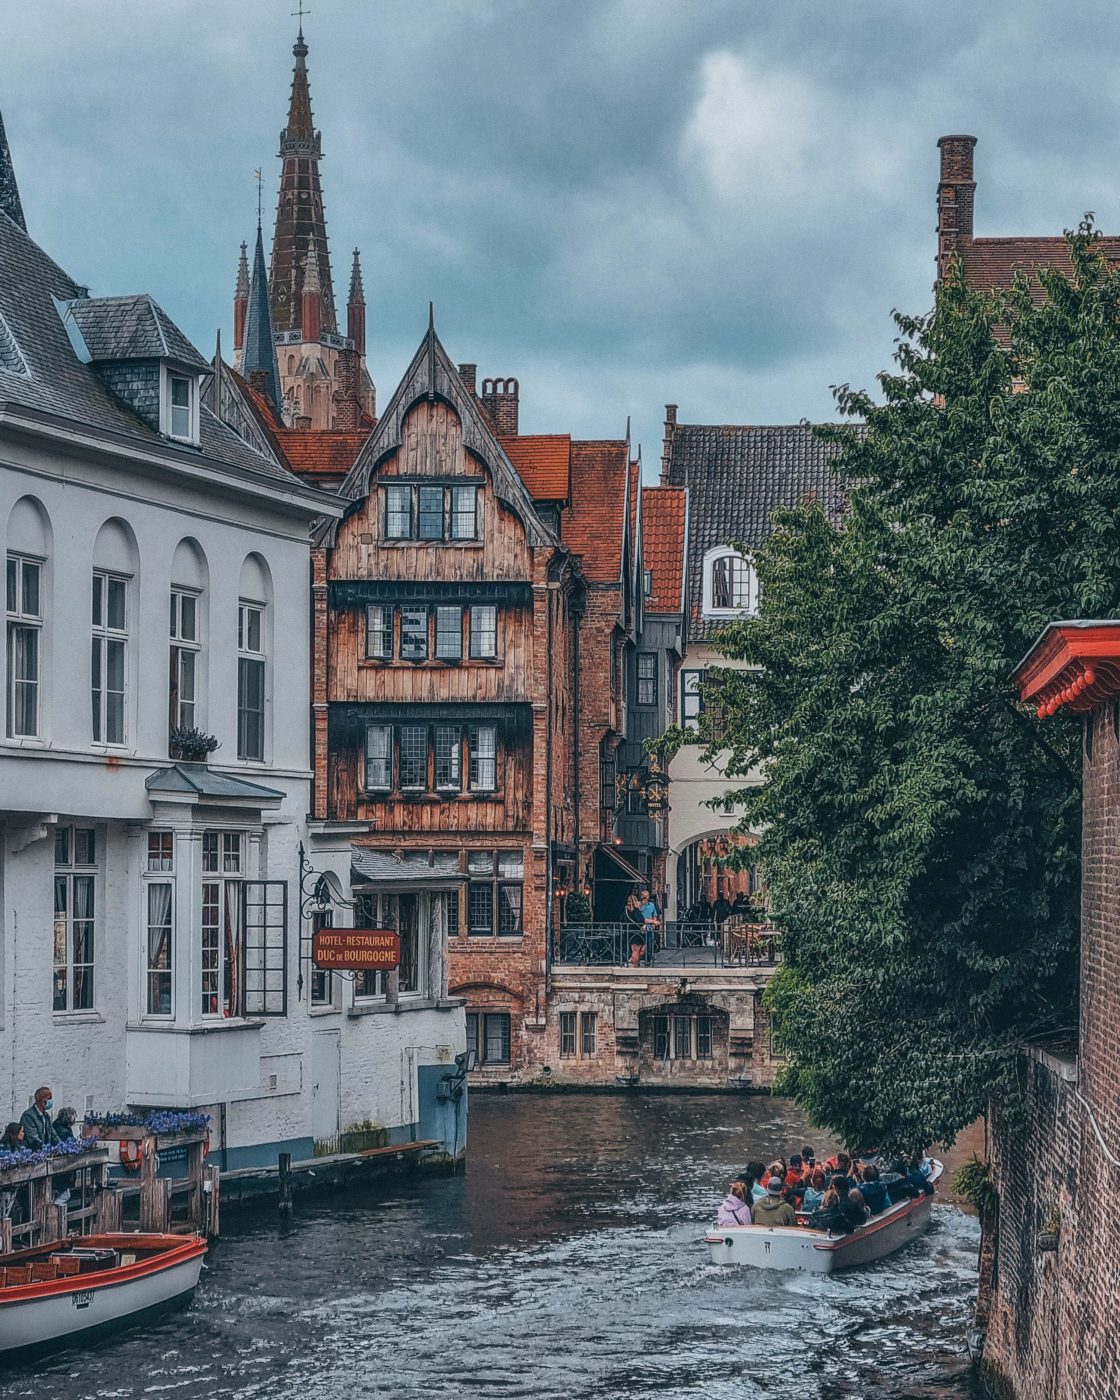 My alternative picks for an interesting city trip in Europe: Bruges instead of Brussels